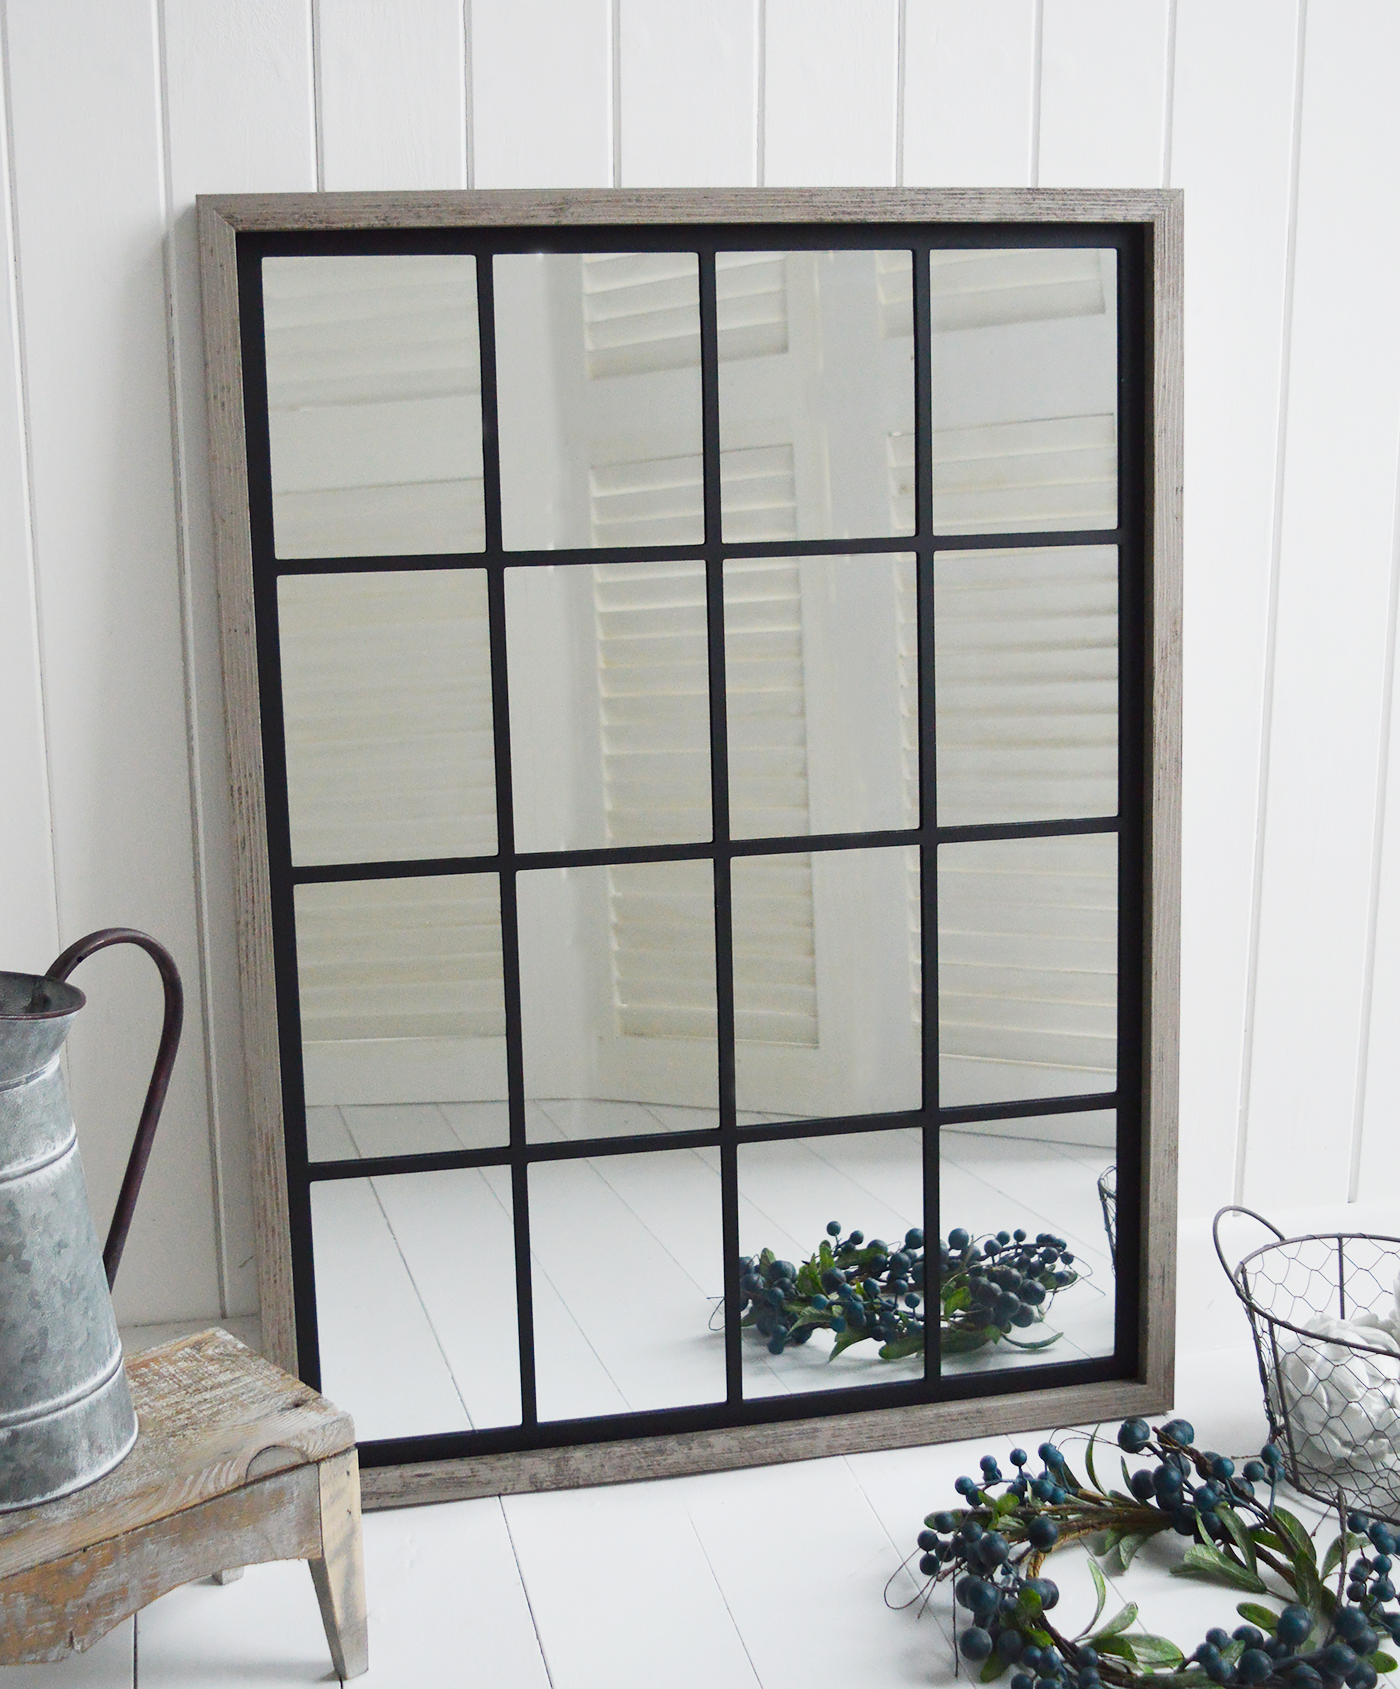 Halifax Grey window mirror  for New England country, coastal and white home interiors. New England Furniture and Interiors